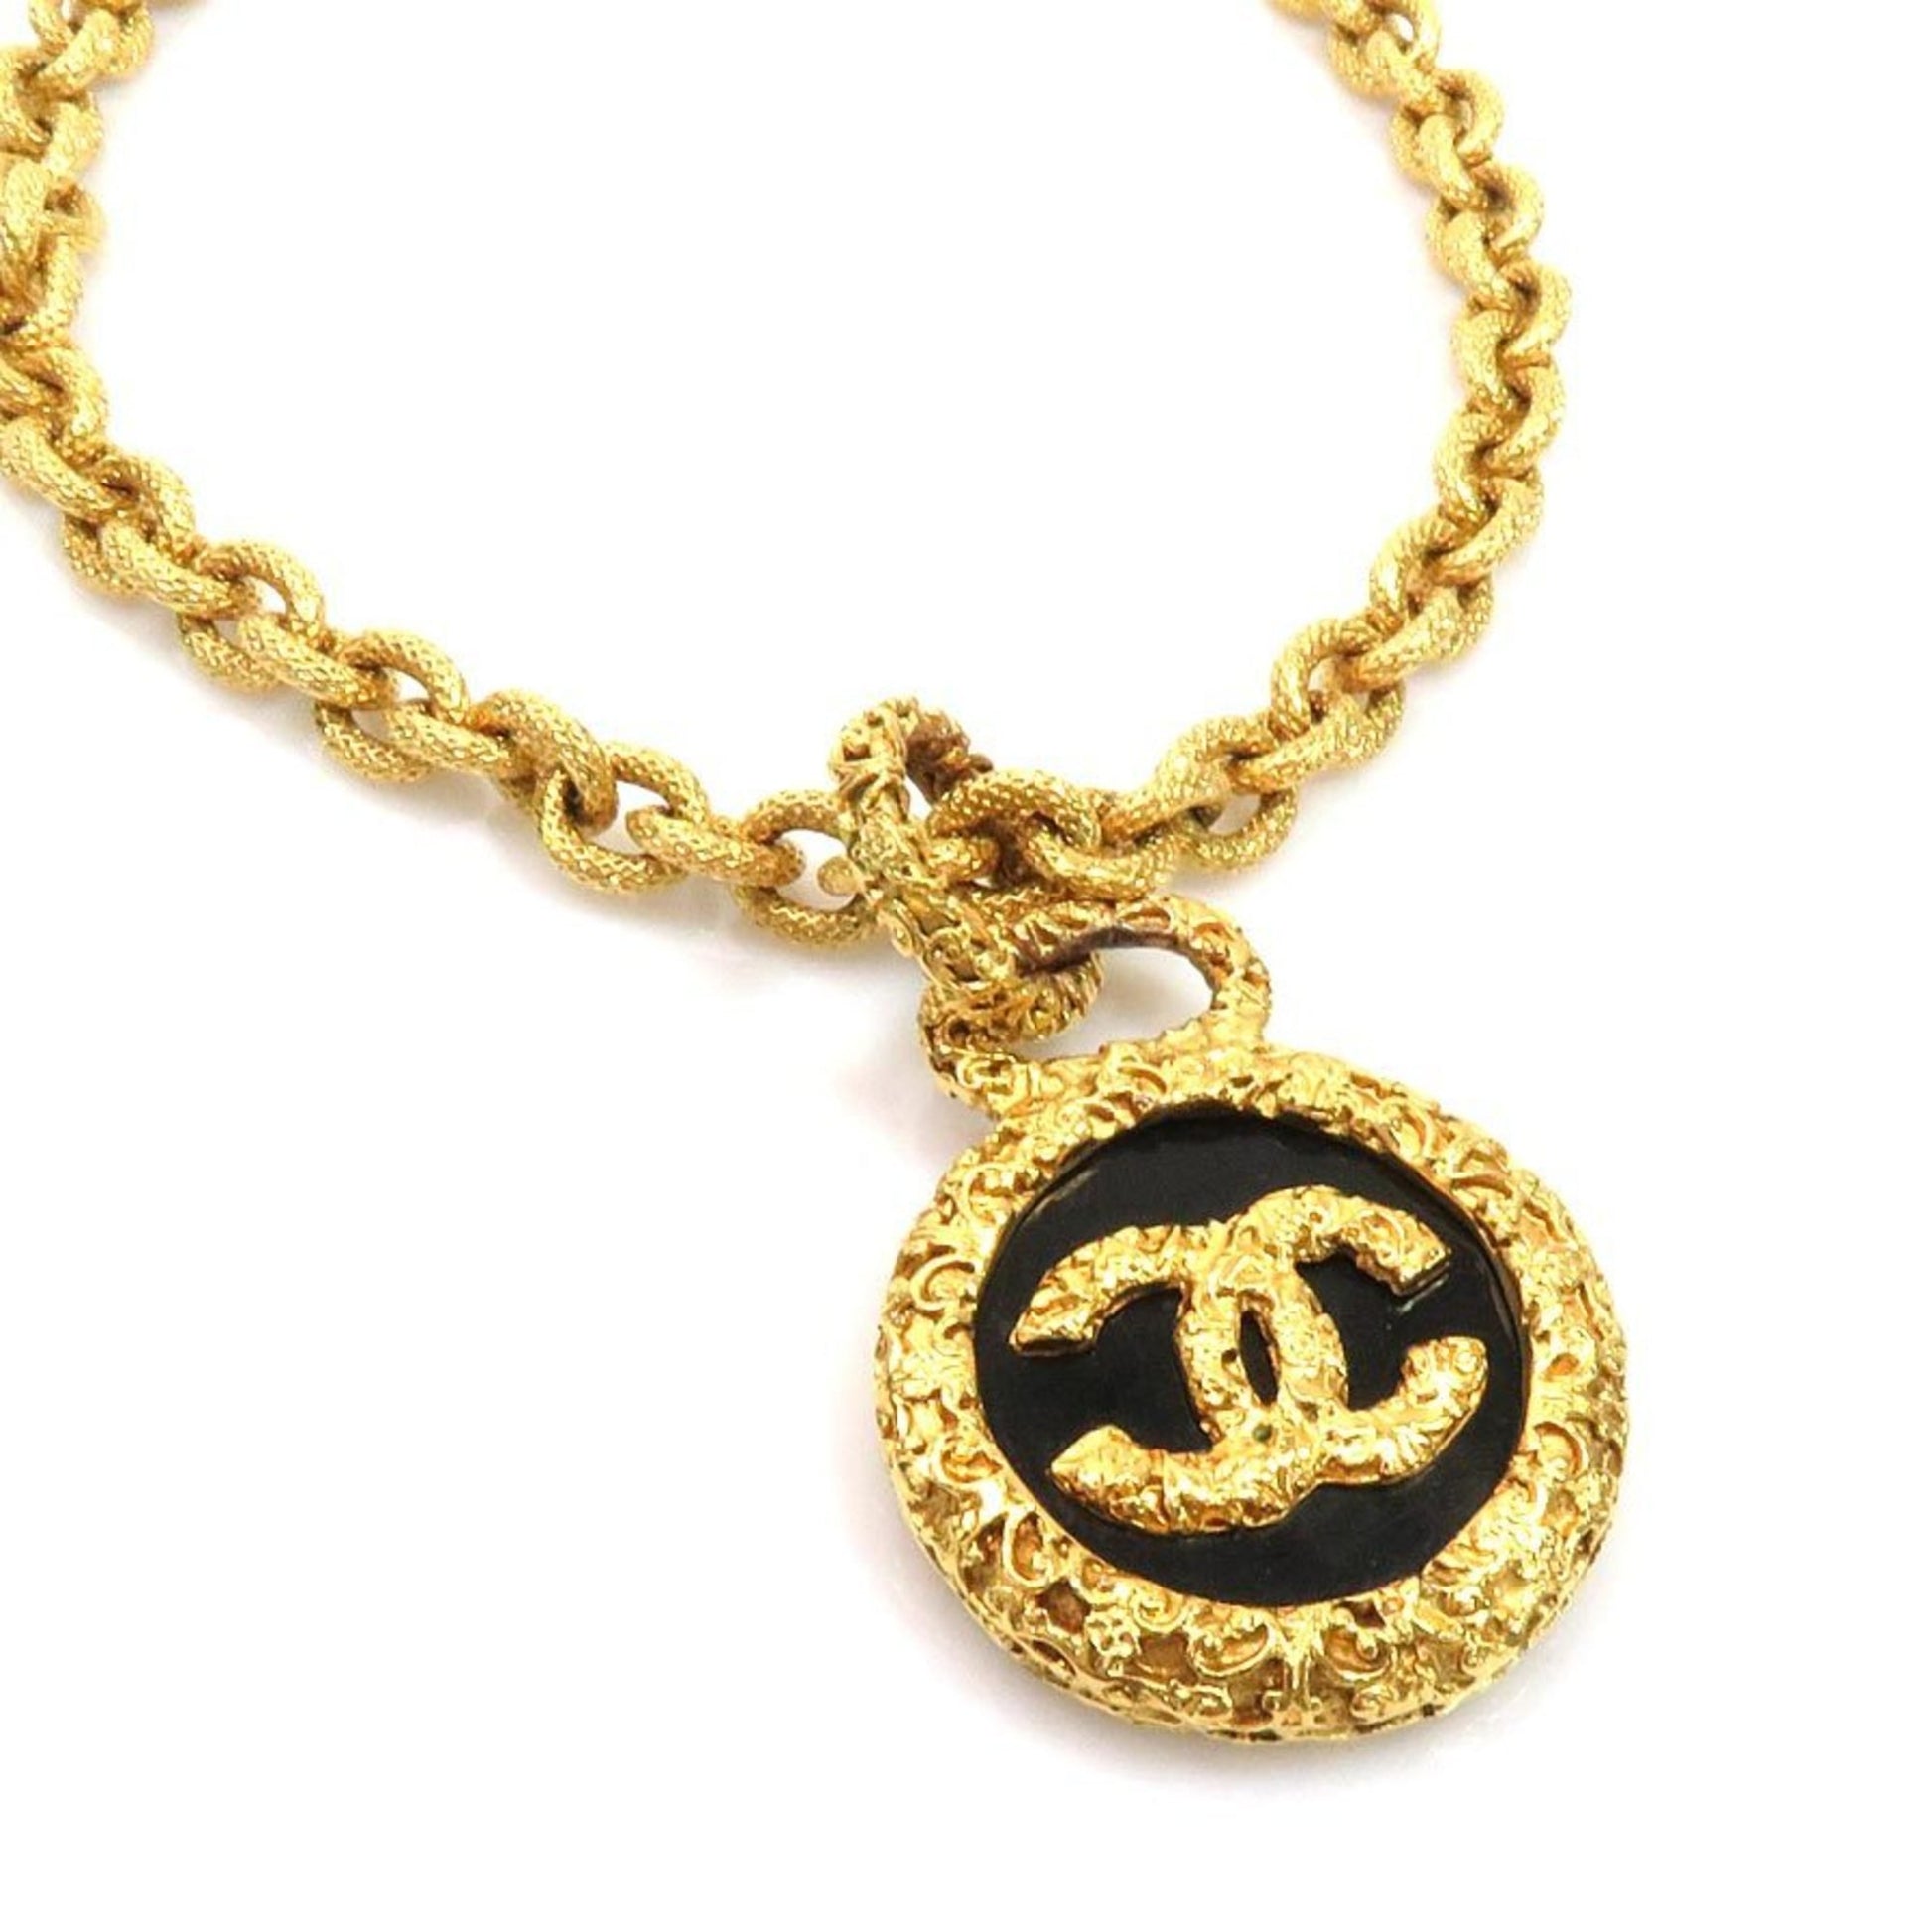 Chanel necklace here mark vintage gold x black metal material CHANEL l